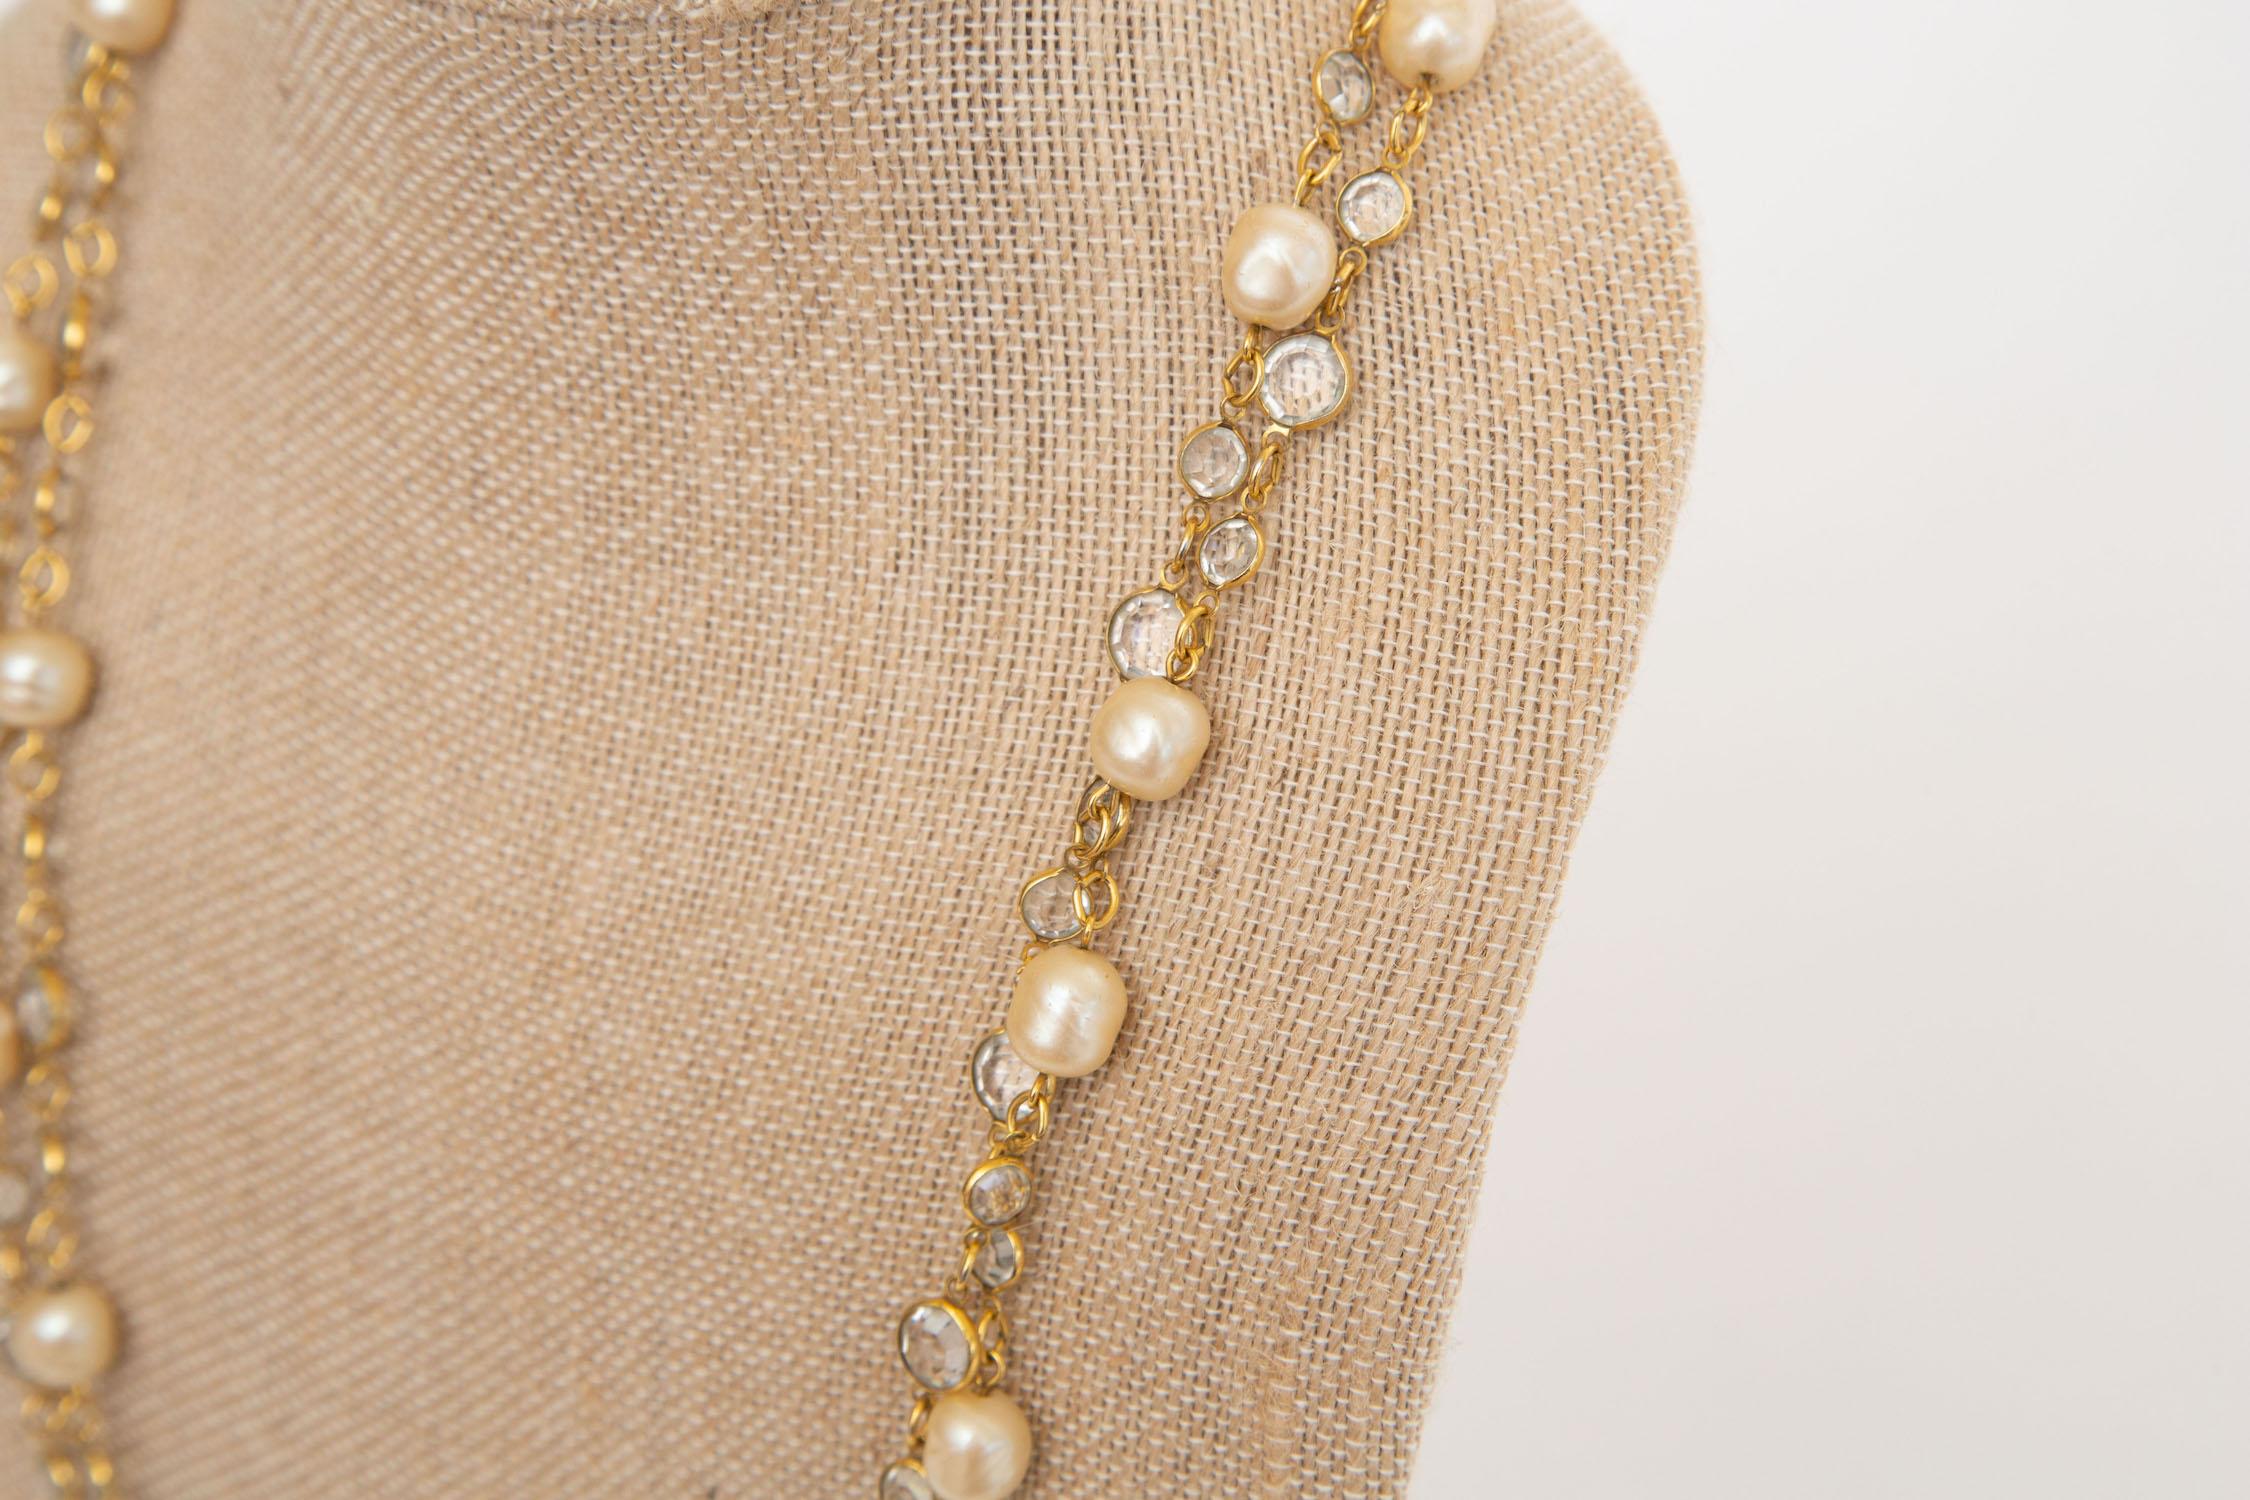 Chanel Vintage Clear Beveled Crystal and Faux Pearl Sautoir Link Necklace  In Good Condition For Sale In North Miami, FL